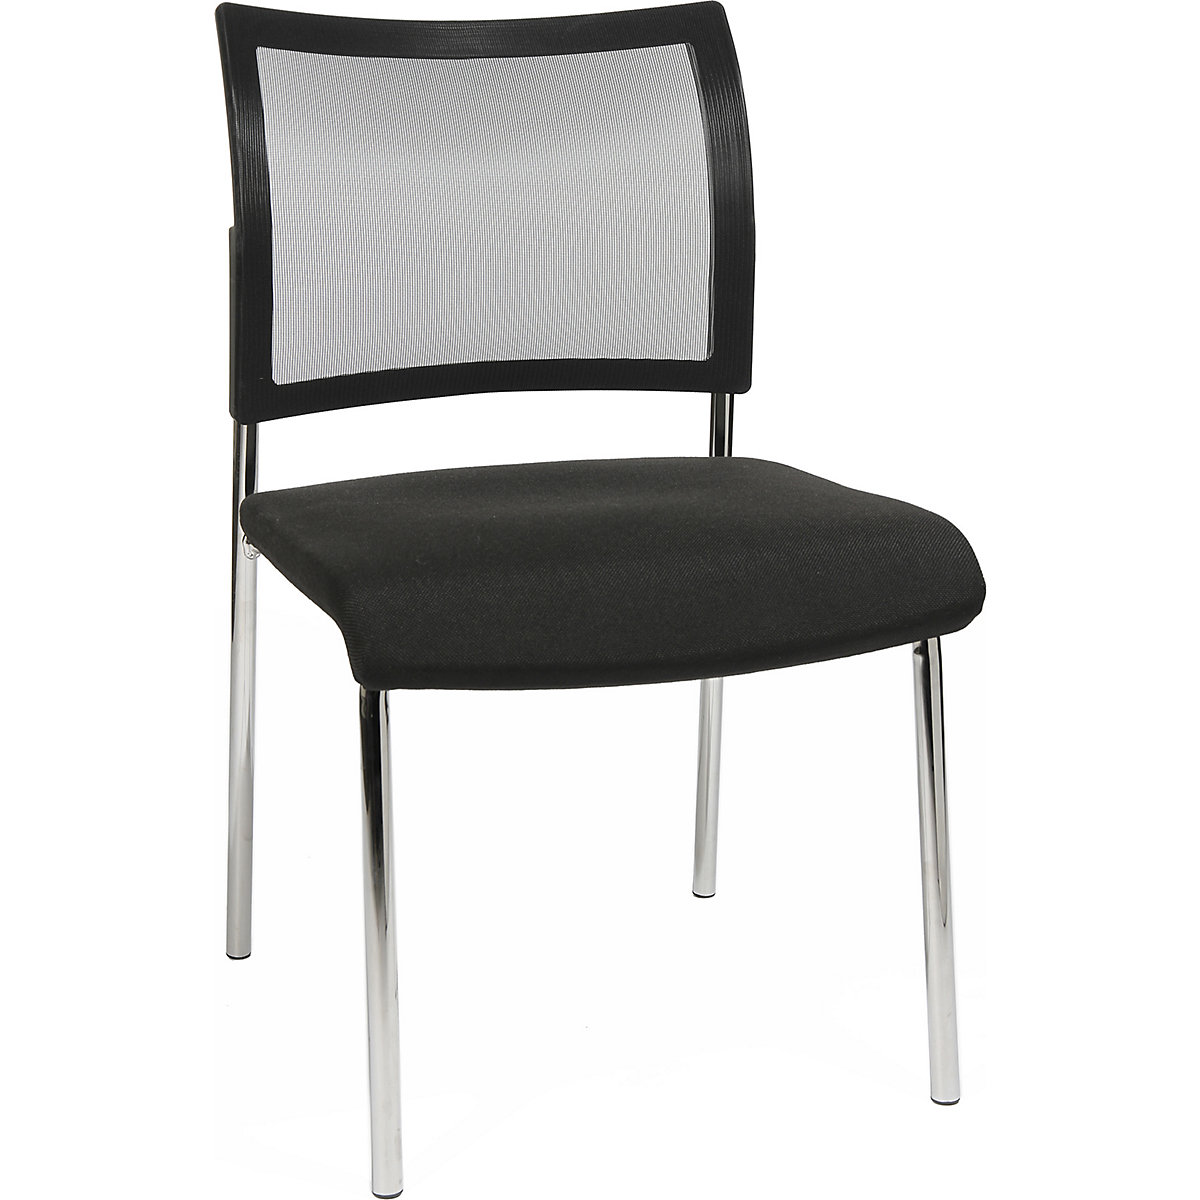 Visitors' chair, stackable – Topstar